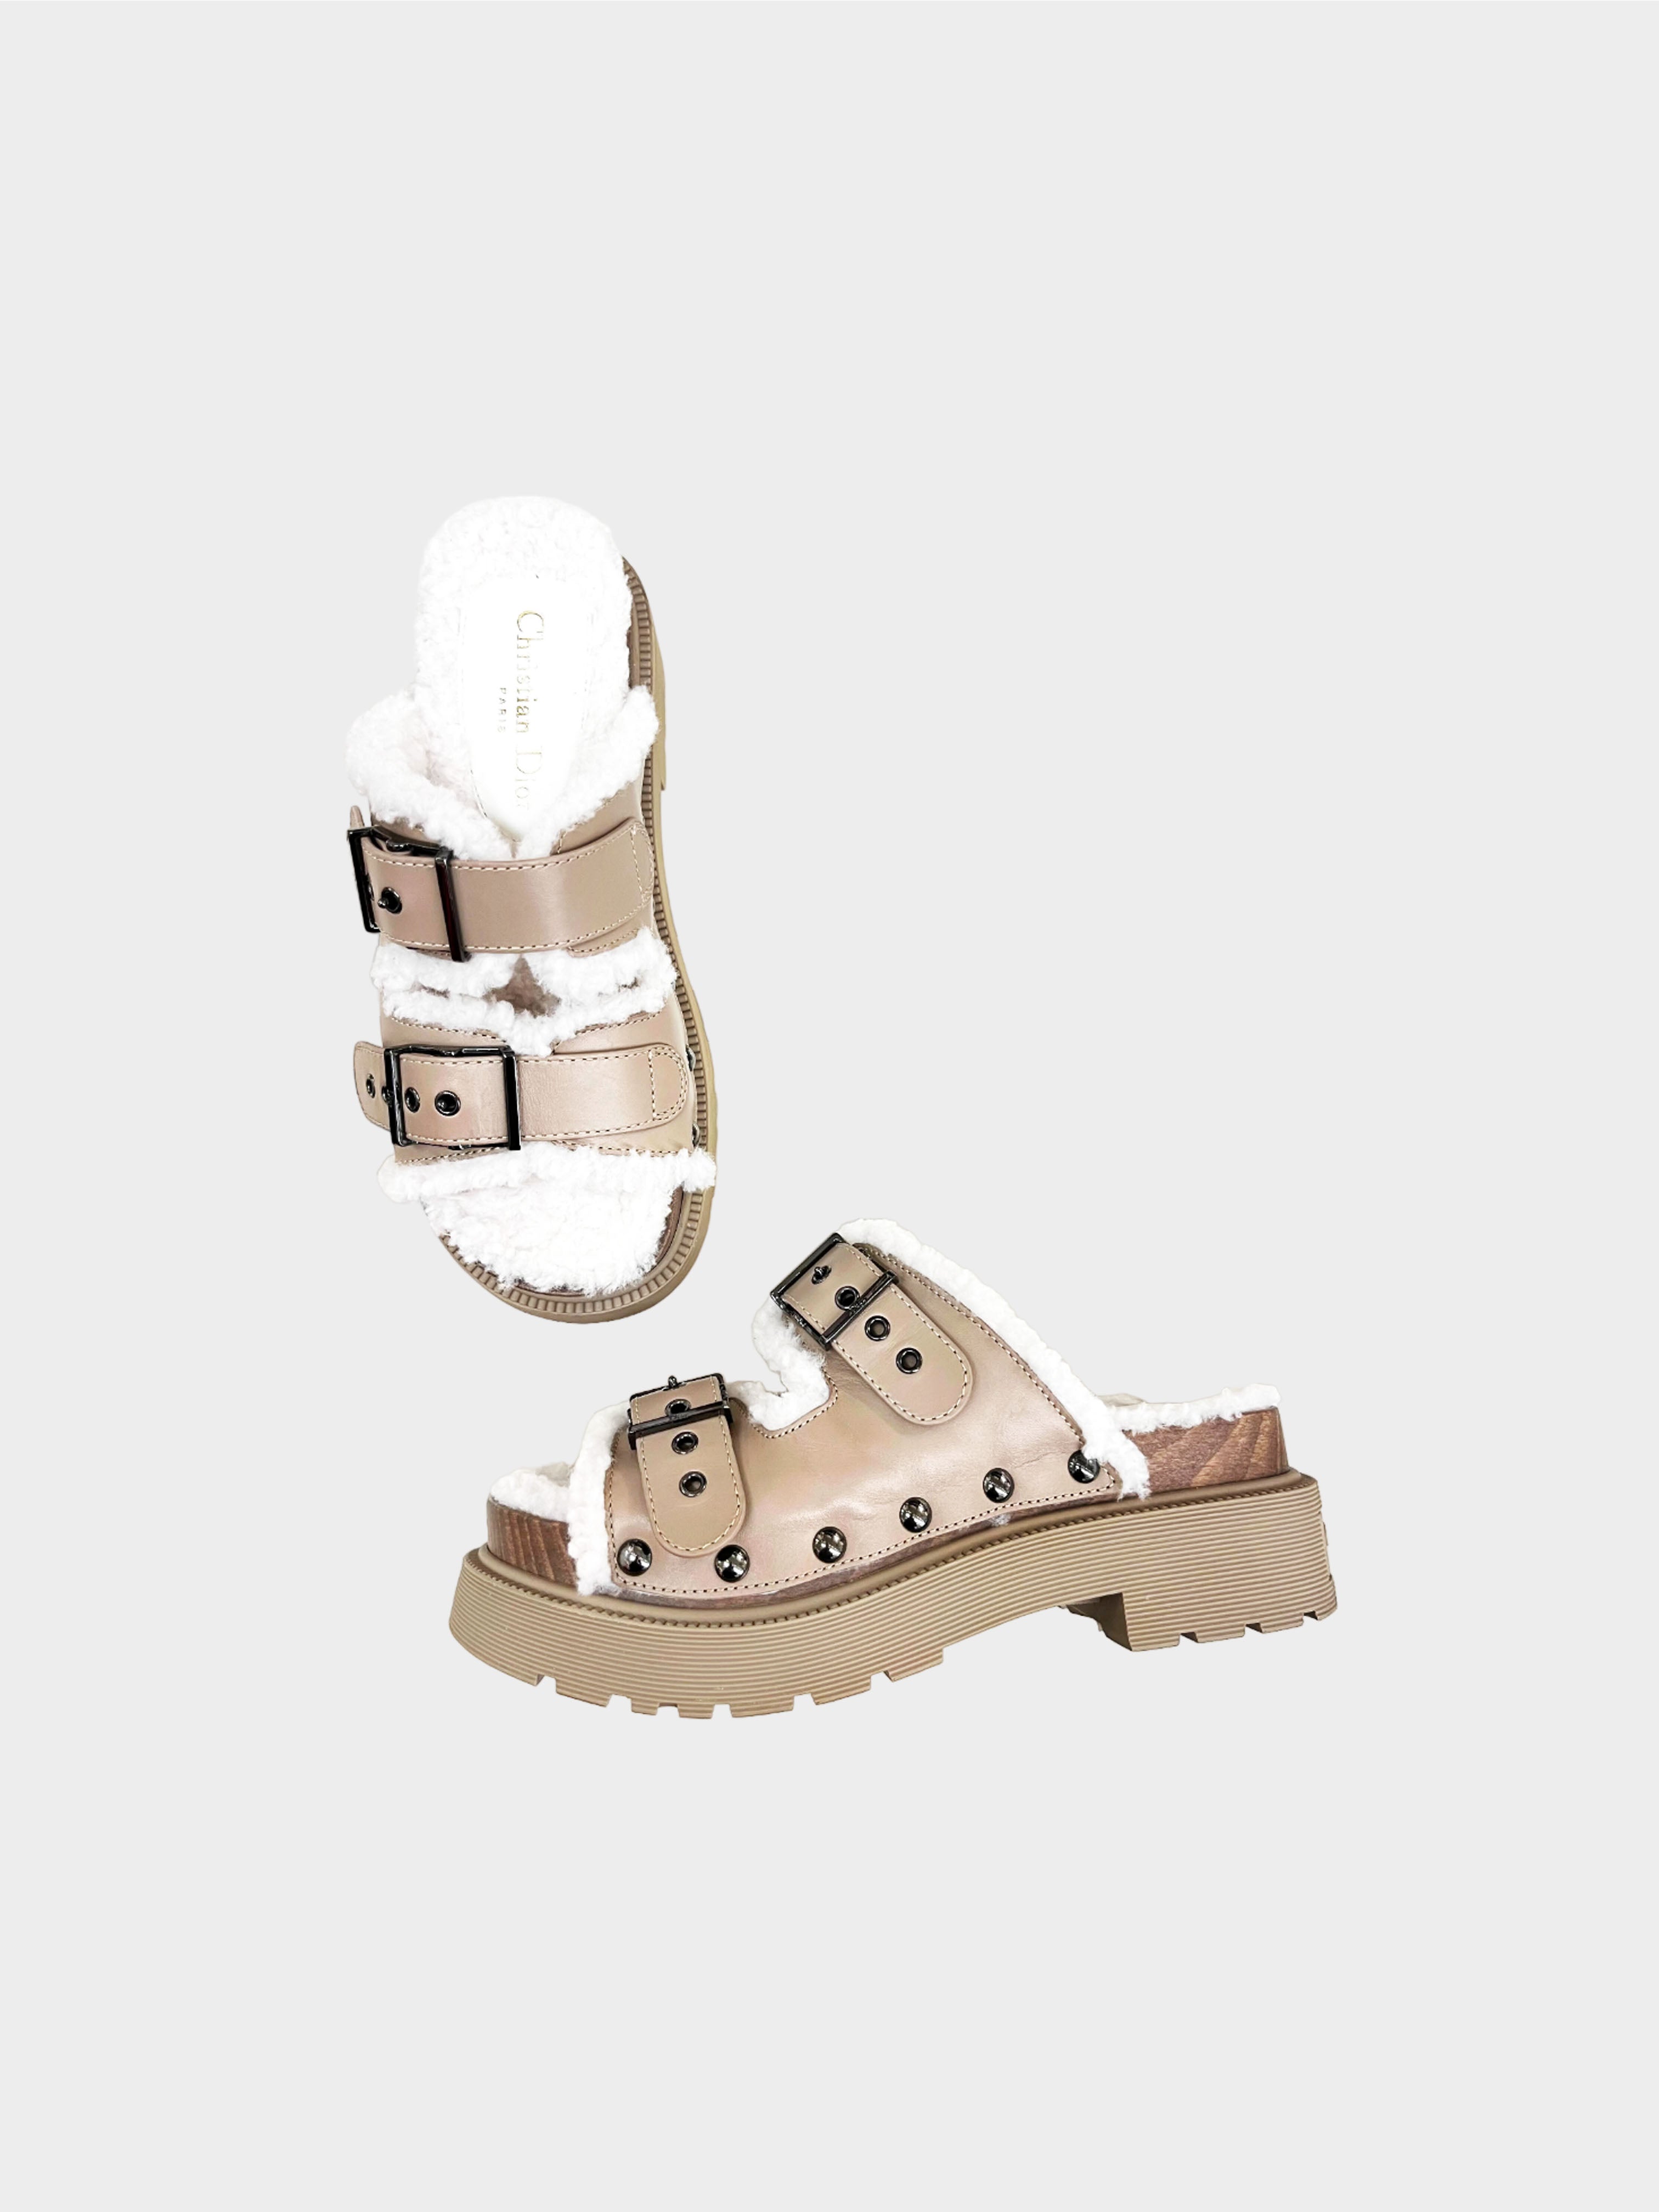 Christian Dior FW 2022 Beige Diorquake Shearling Lined Leather Sandals